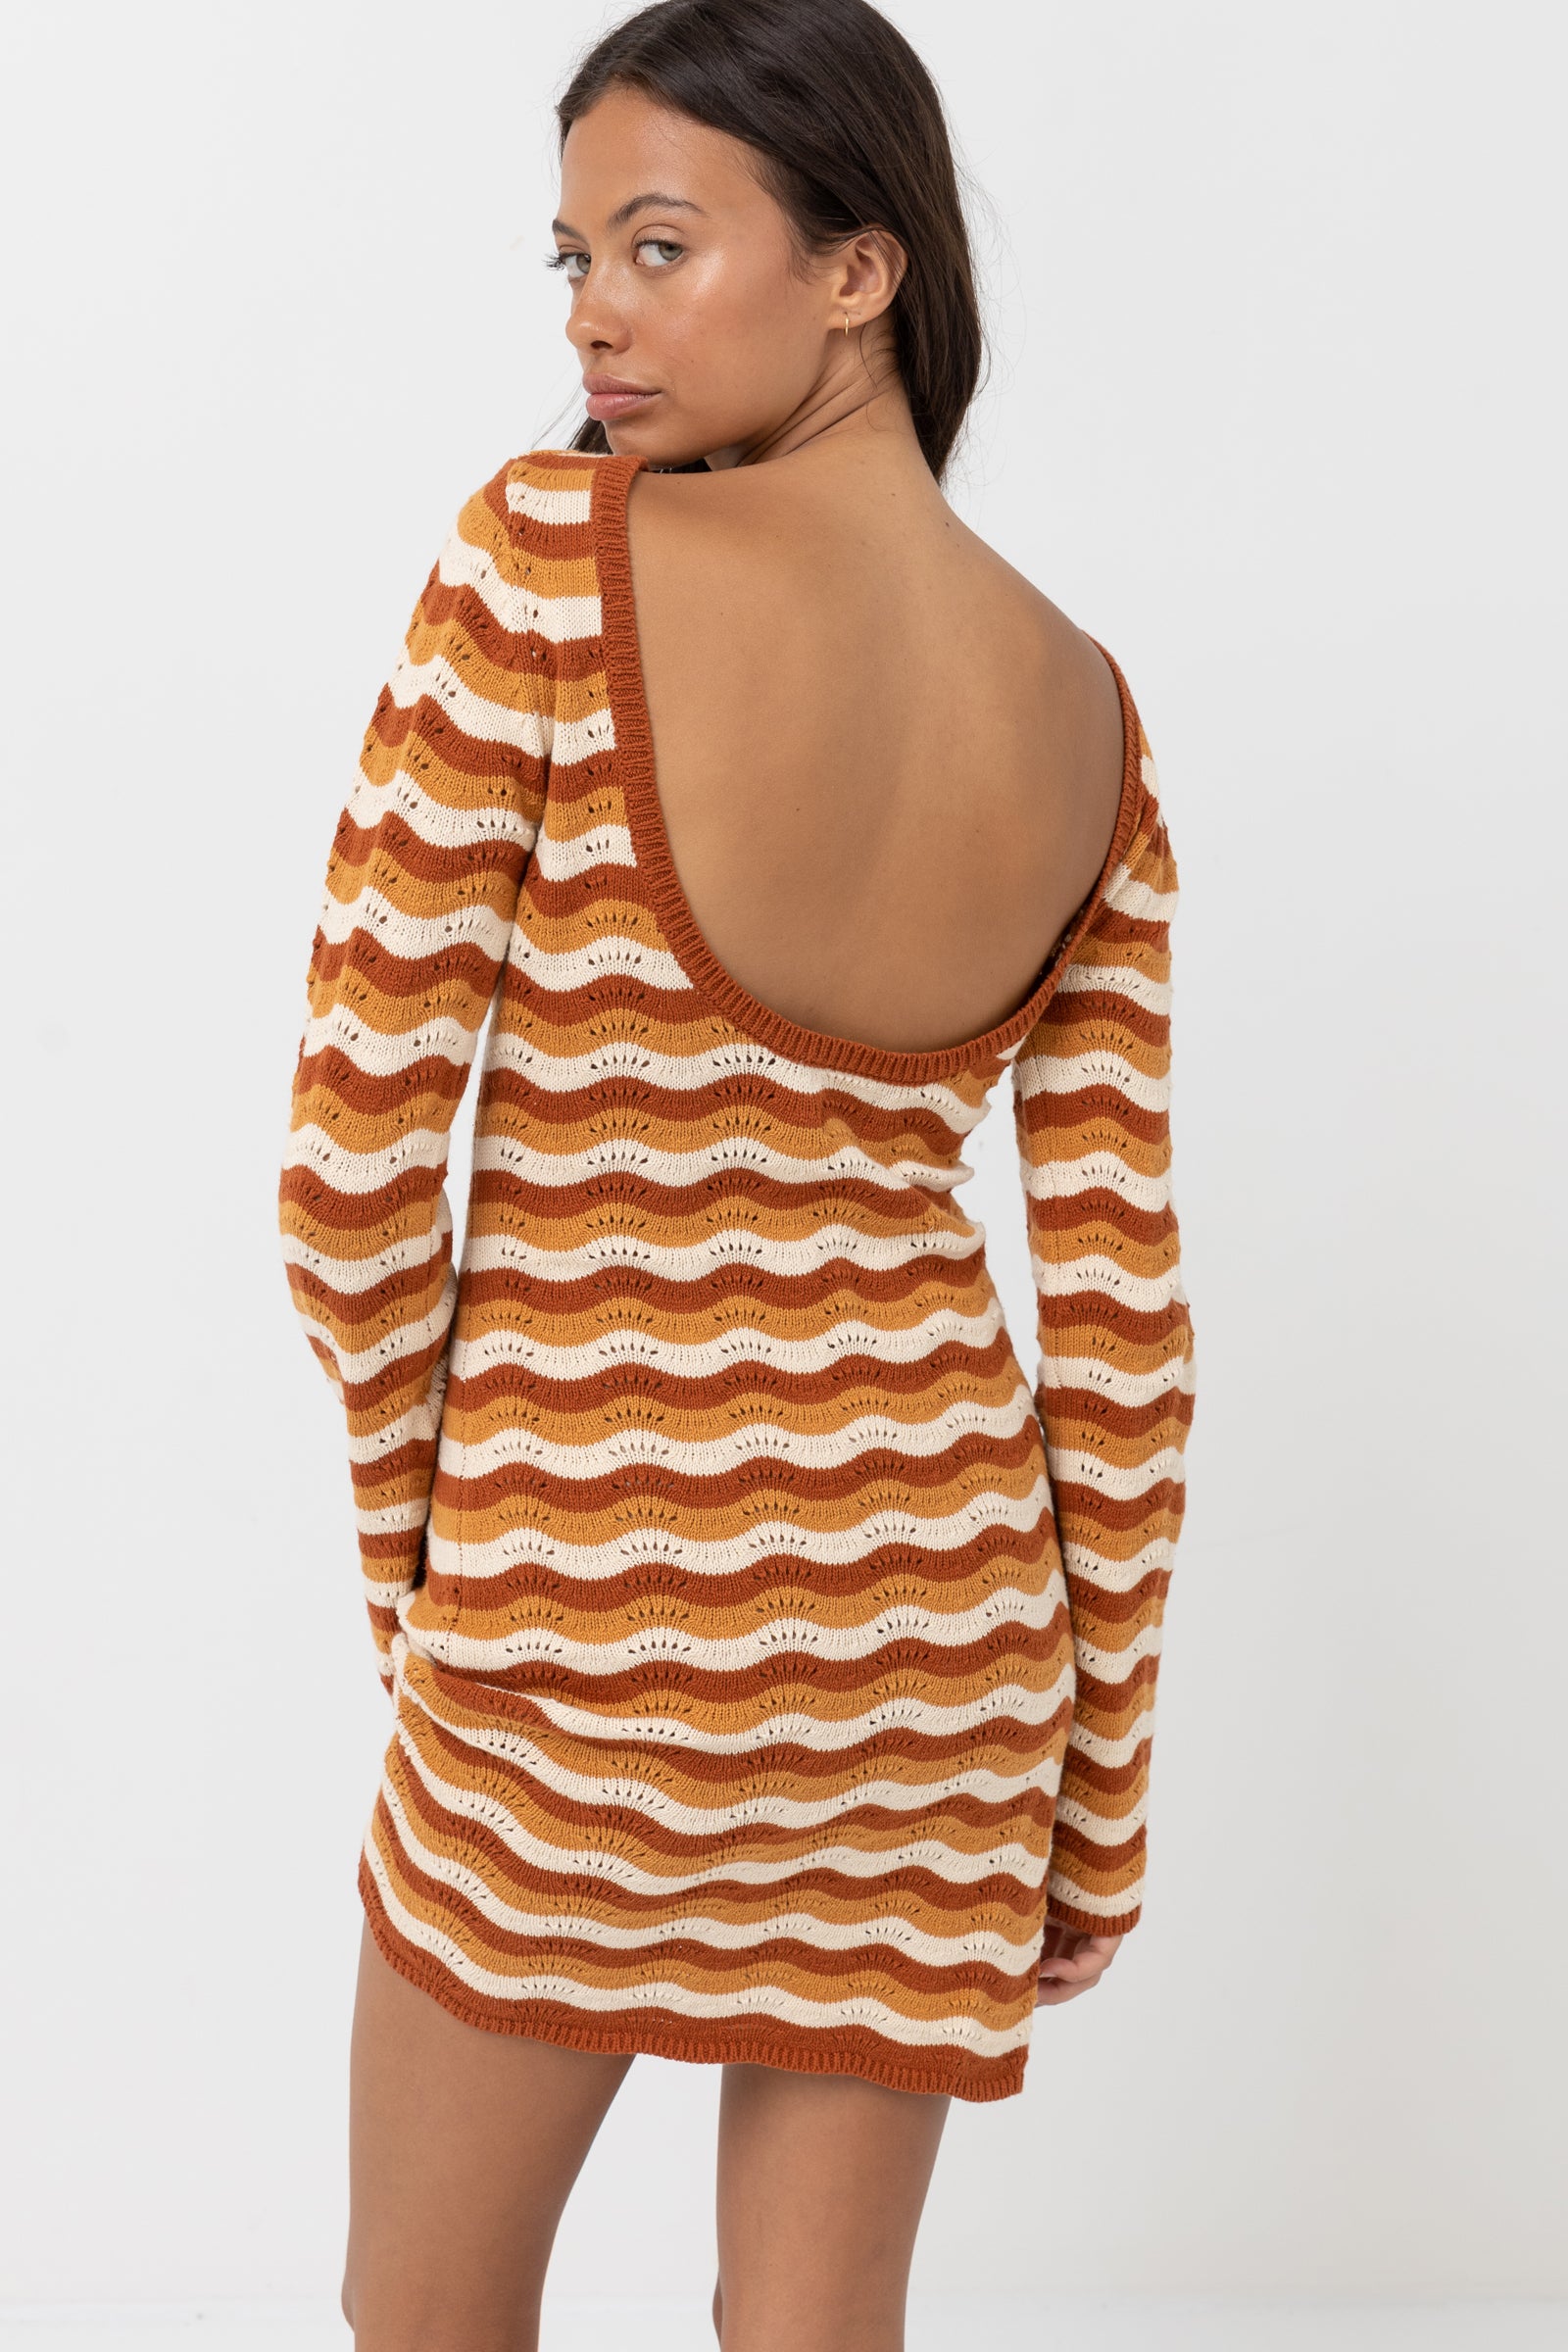 red,orange,yellow,white knit dress spring summer cover up